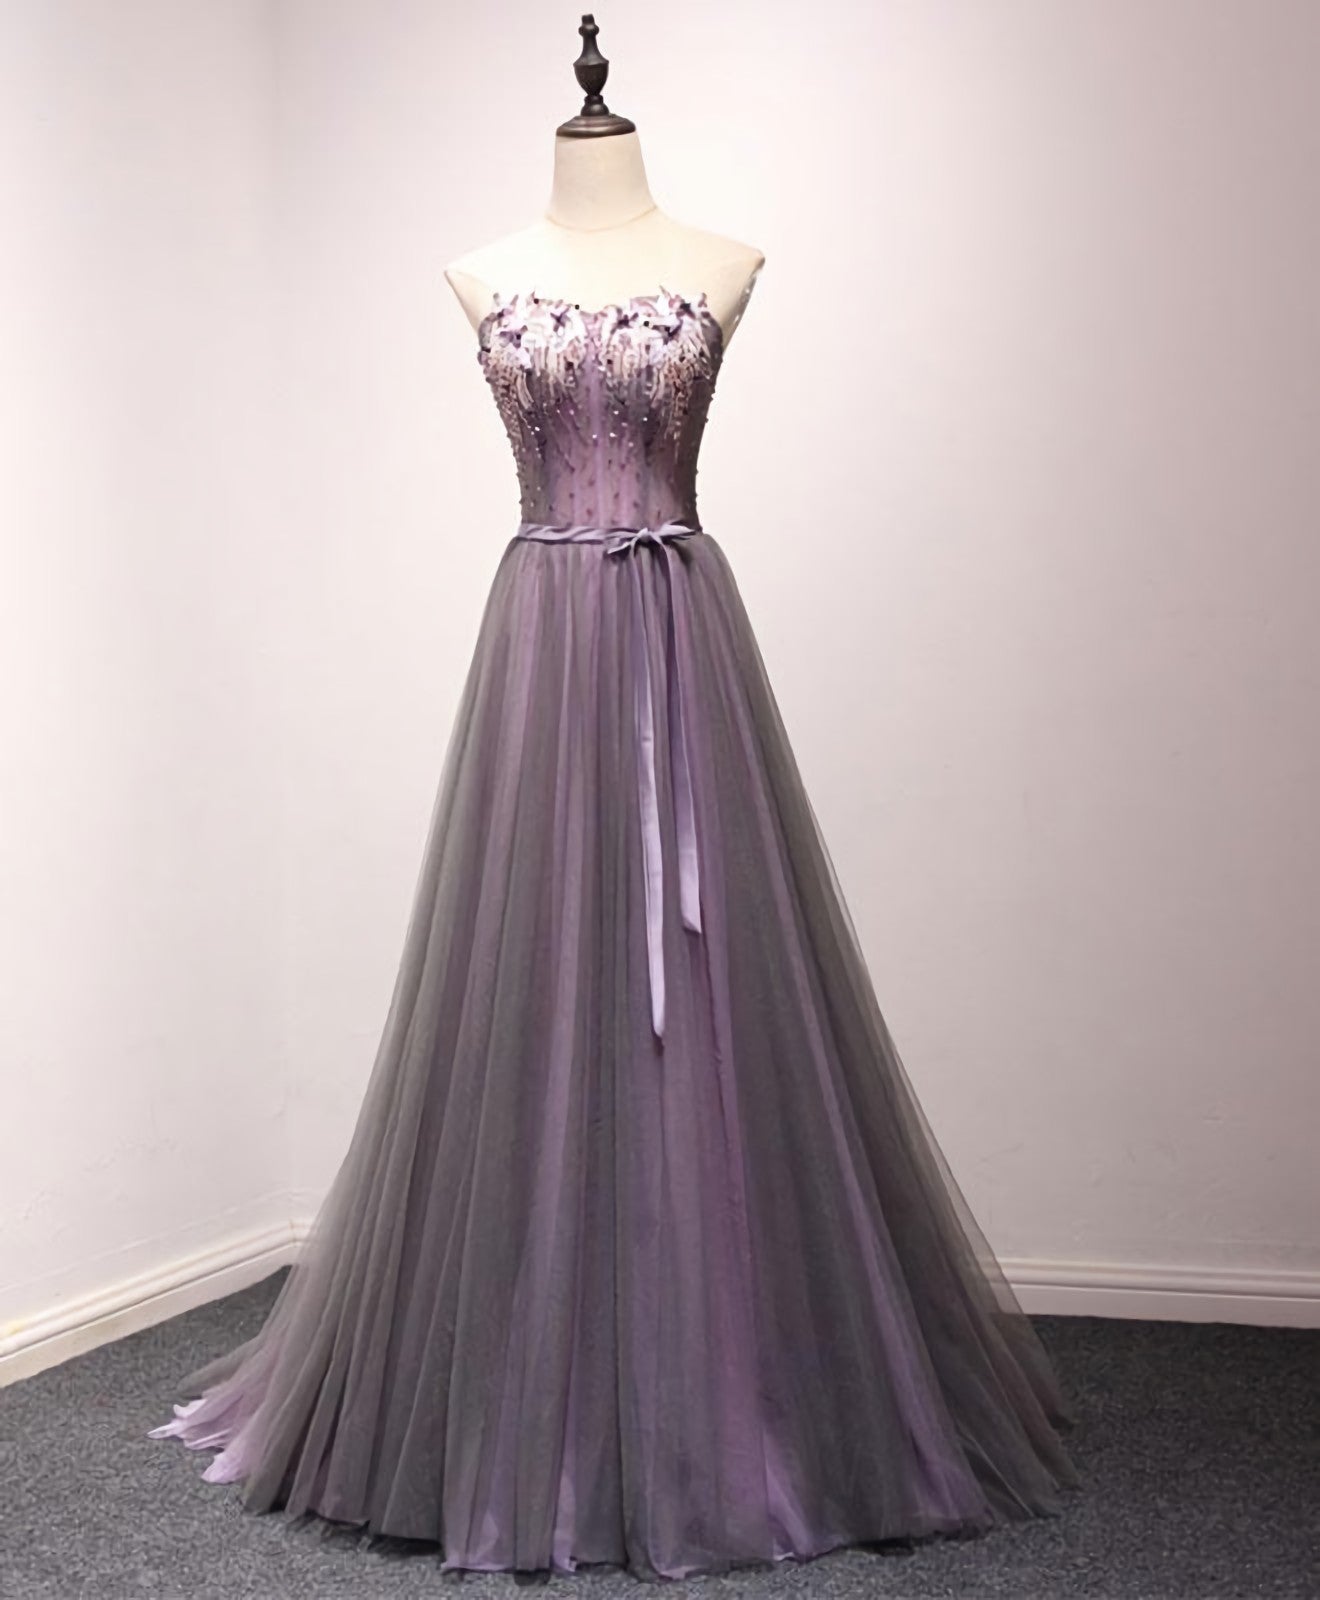 Pruple Tulle Sweetheart Neck Long Corset Prom Dress, Evening Dress outfit, Homecomming Dresses Blue